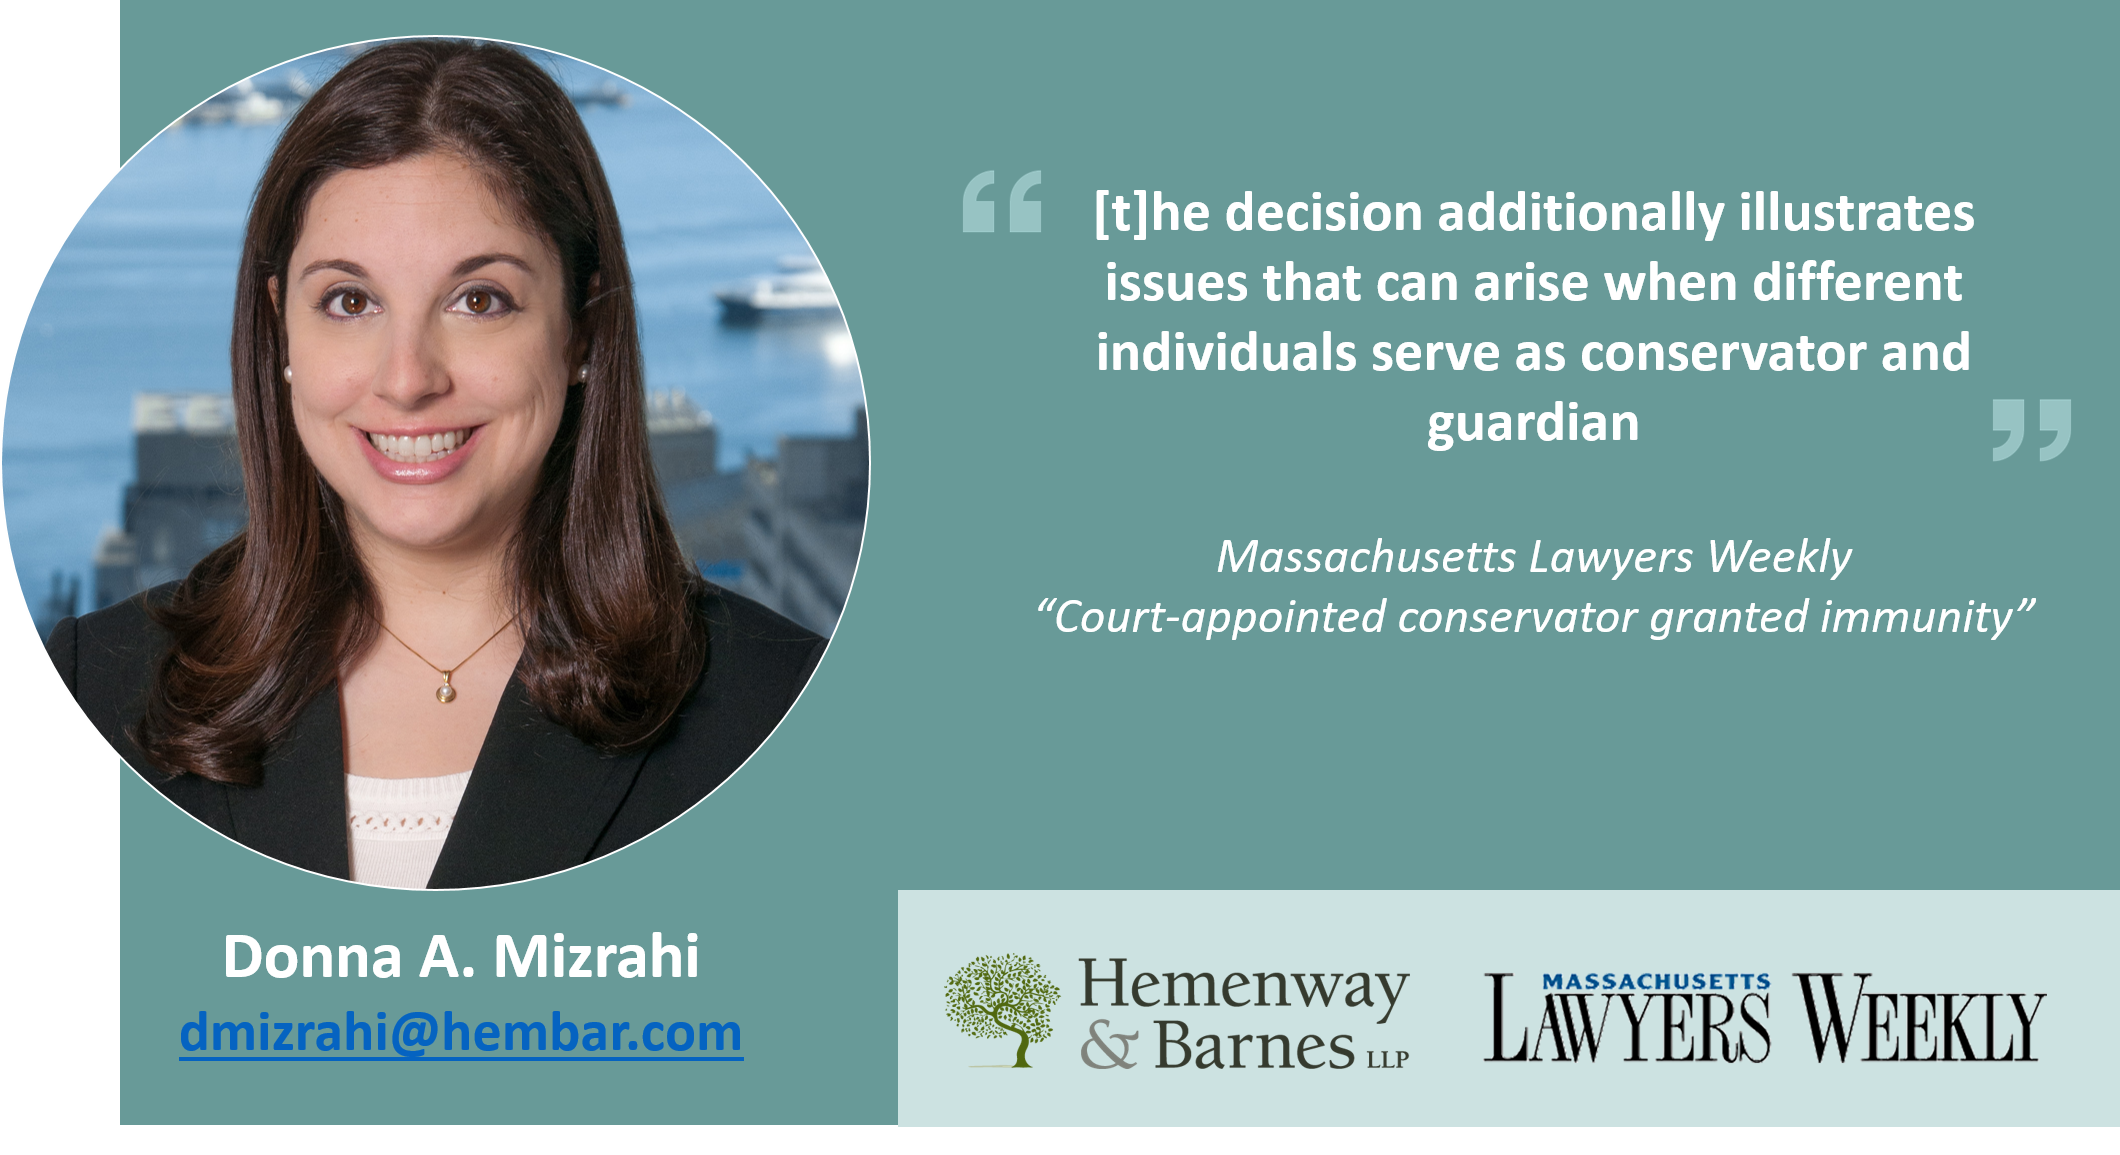 Donna Mizrahi quoted in Massachusetts Lawyers Weekly article “Court-appointed conservator granted immunity”